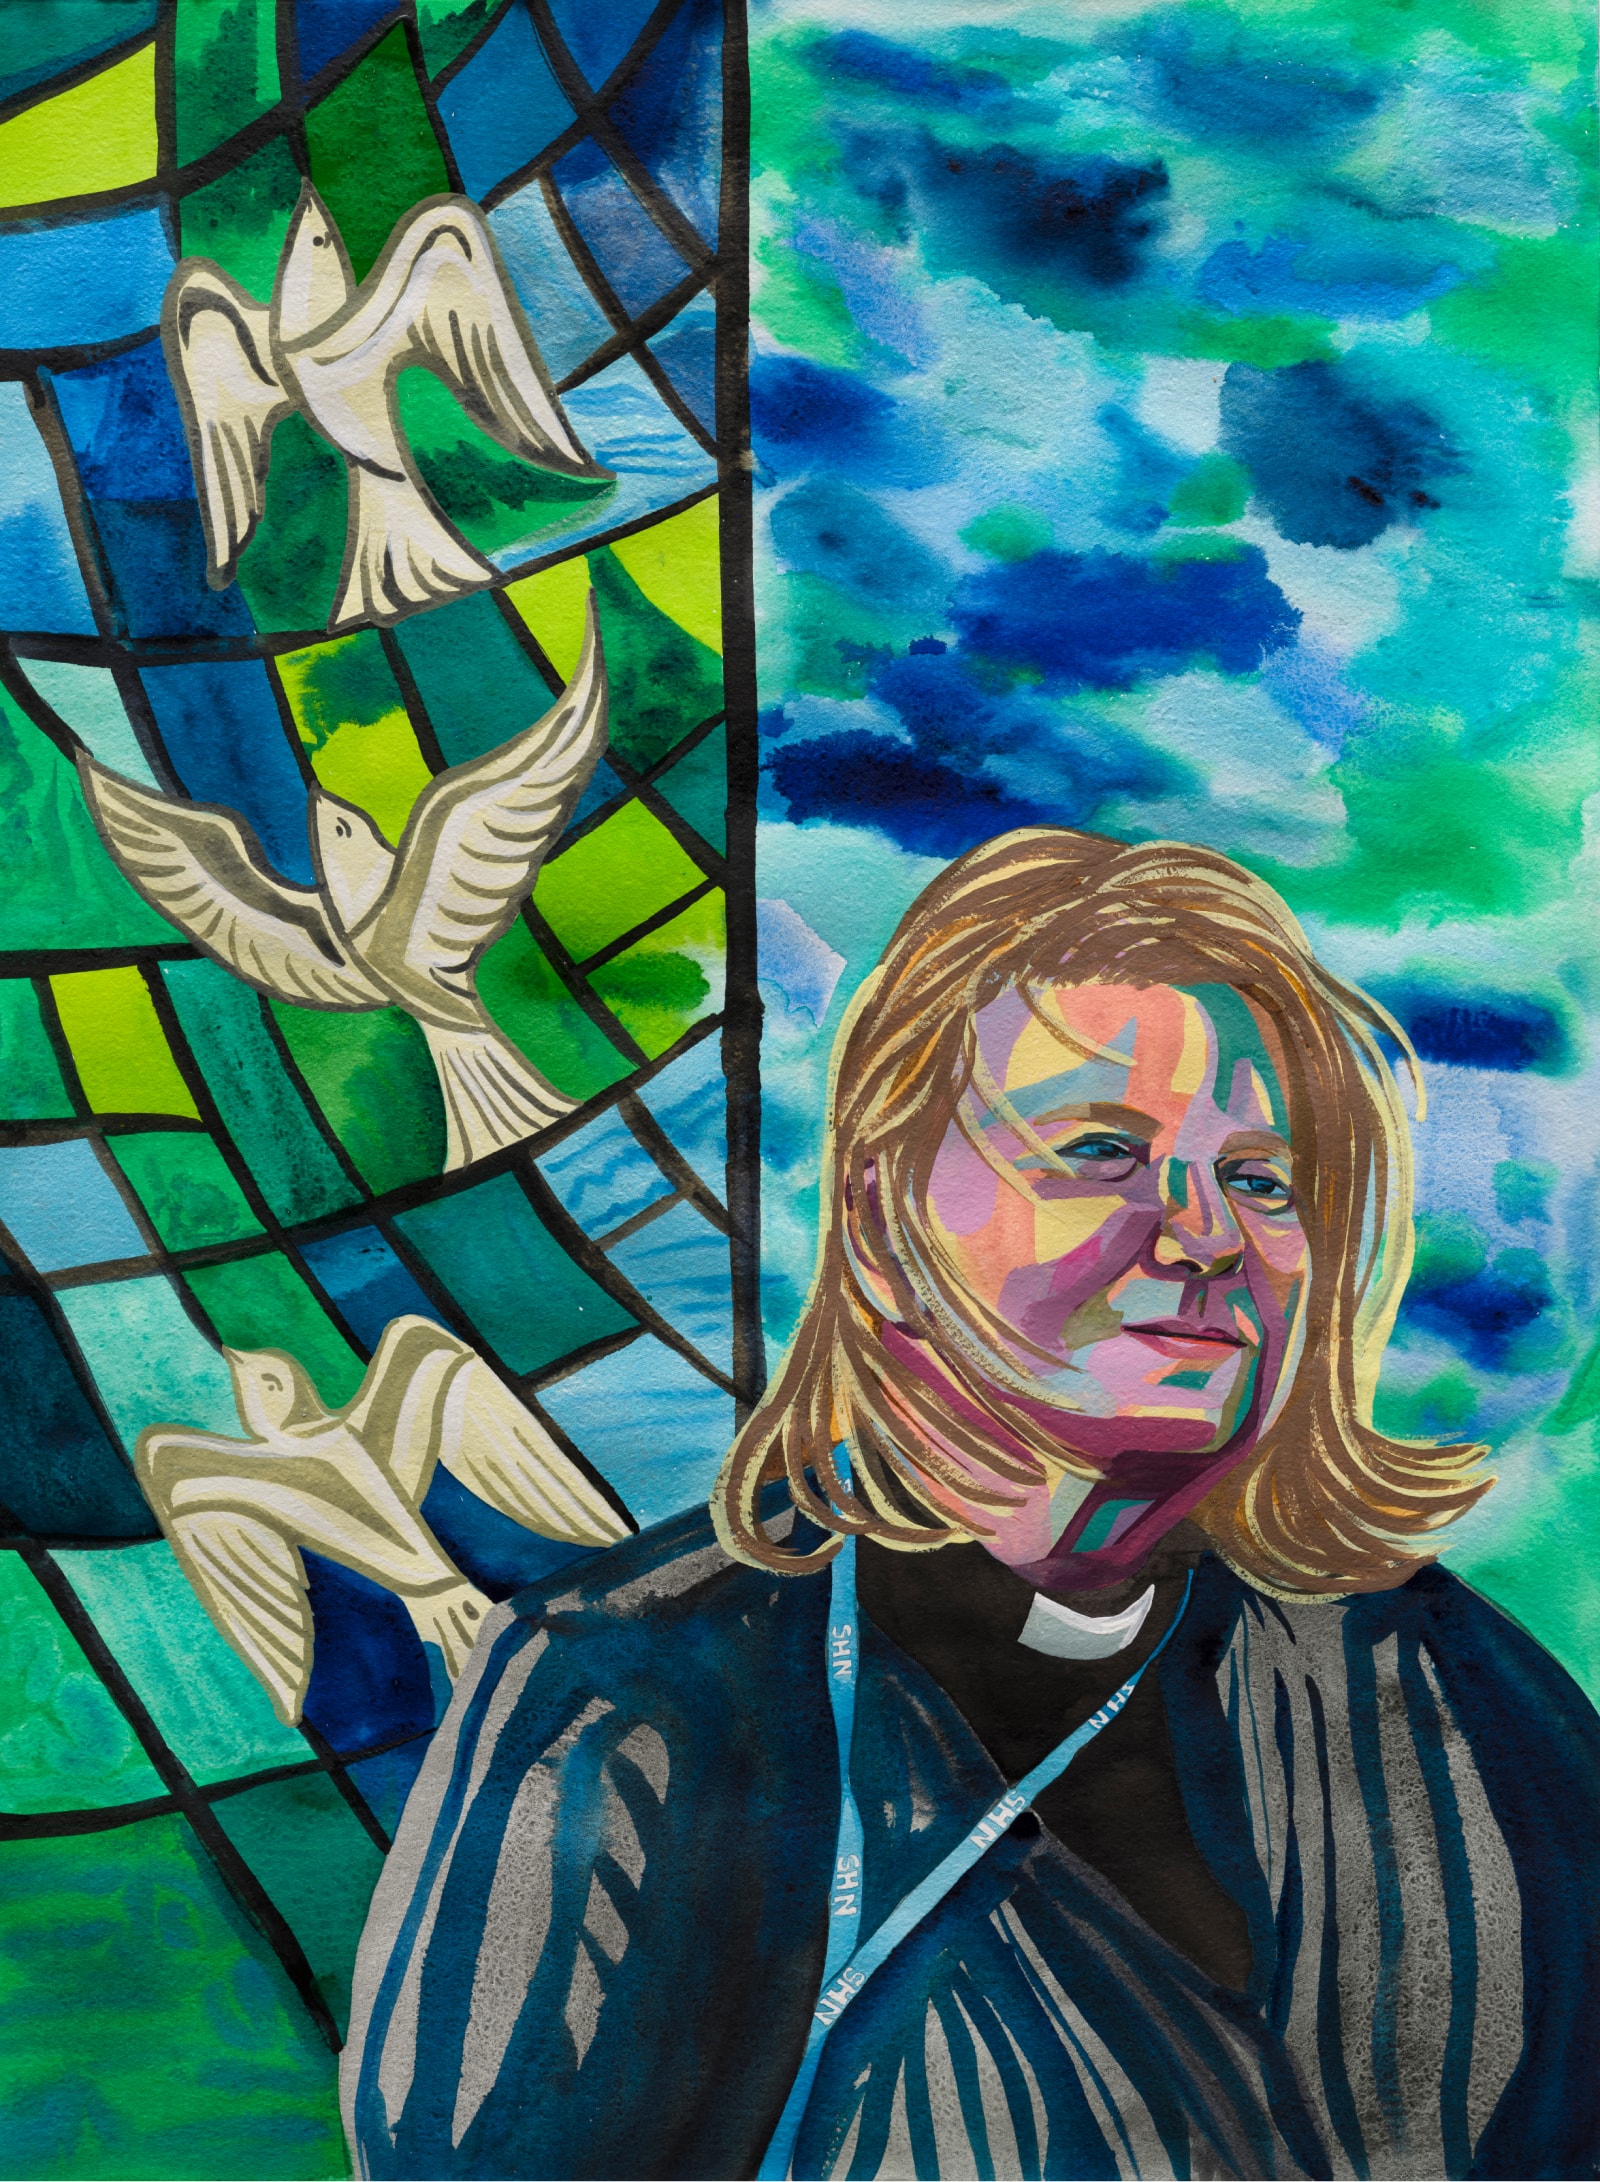 Nisenbaum’s “Reverend Jackie” featuring a woman in clergy robes stand in front of a green and blue glass window with doves